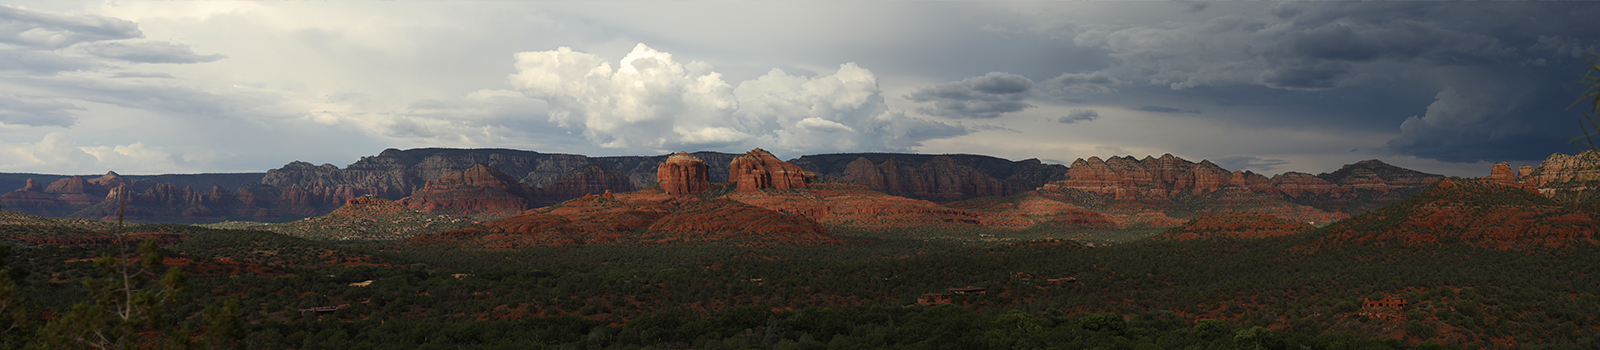 A panoramic view of the Sedona area showcases a contrast between the crimson colored rocks and a dark, dreary cloud filled sky.